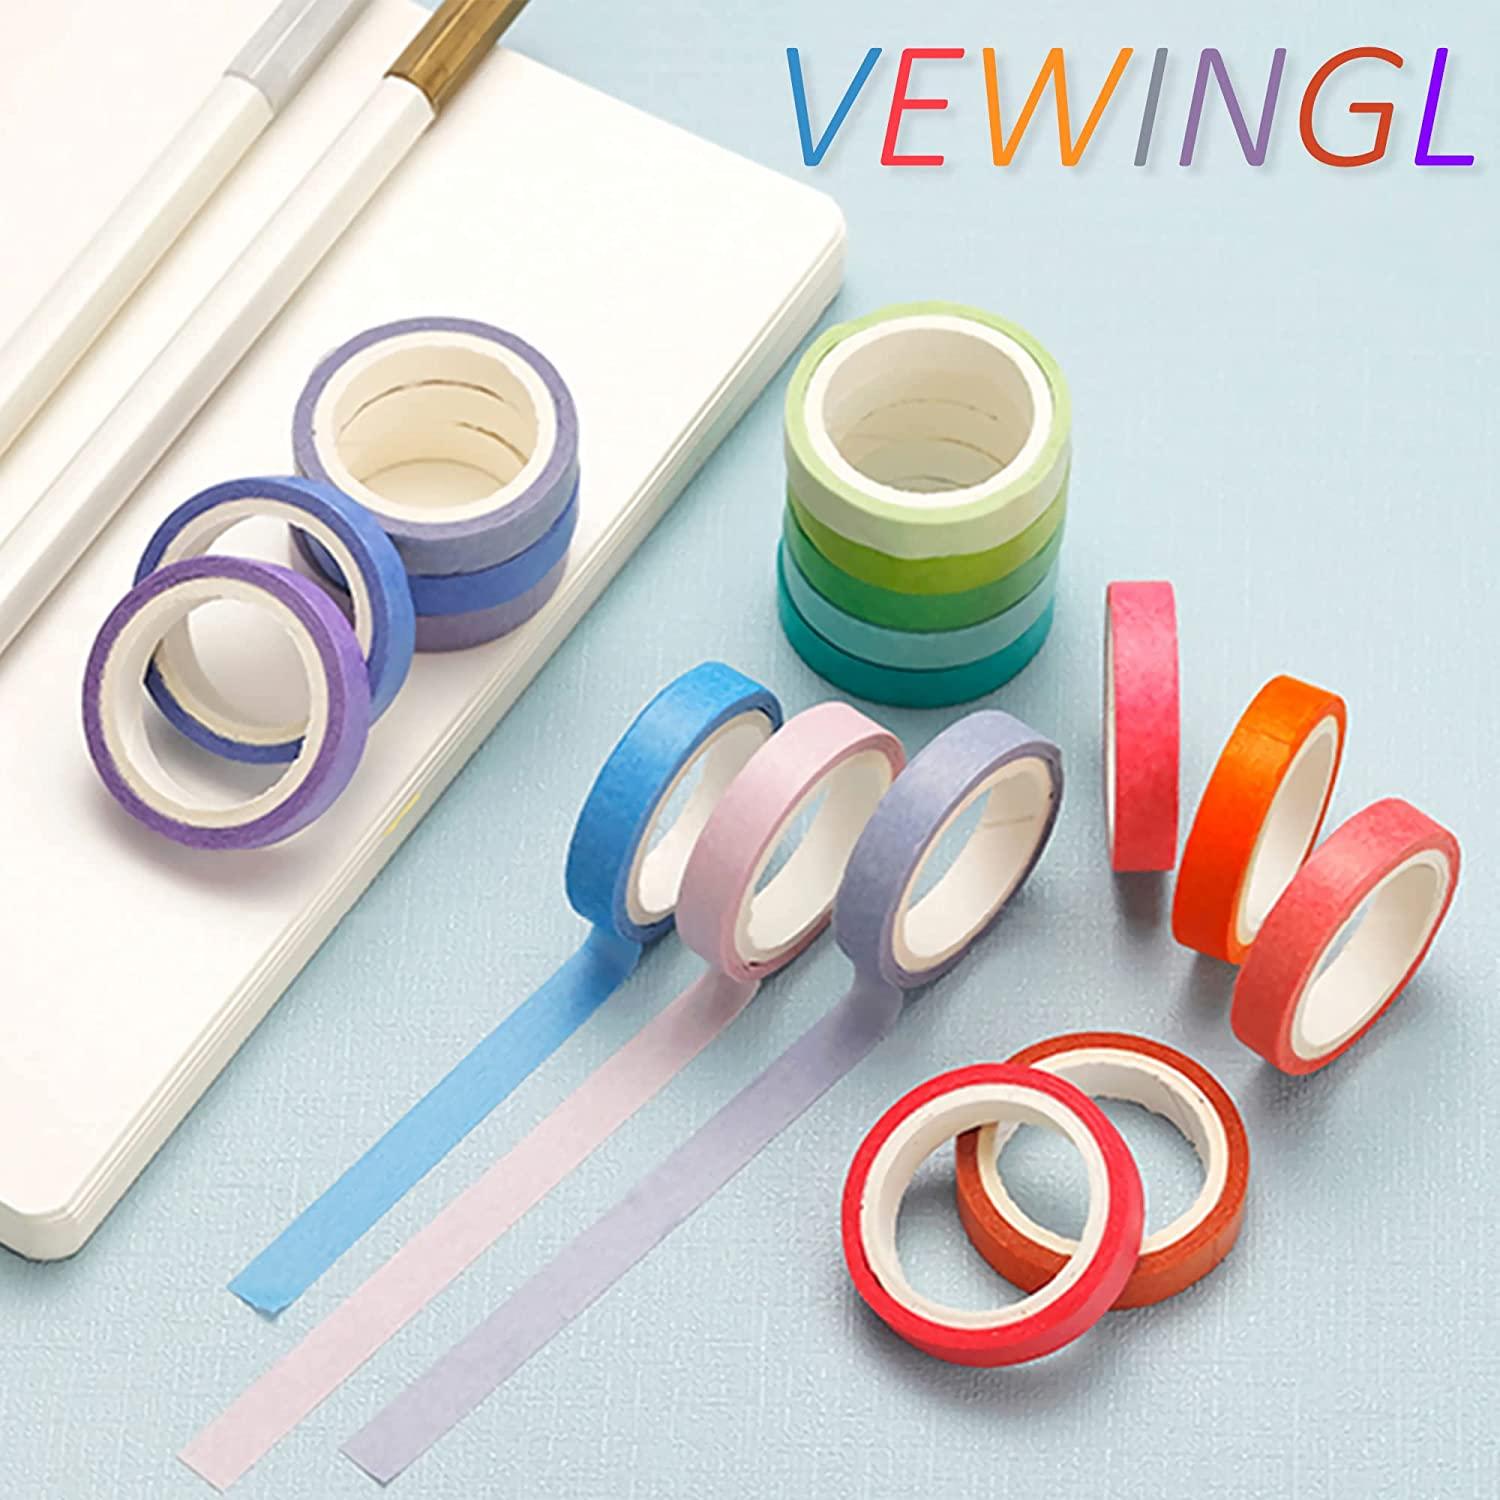  VEWINGL 60 Rolls Washi Tape Set,8 mm Wide Decorative Colored  Masking Tapes,Aesthetic for Scrapbooking,DIY Arts and Crafts, Bullet  Journal : Arts, Crafts & Sewing